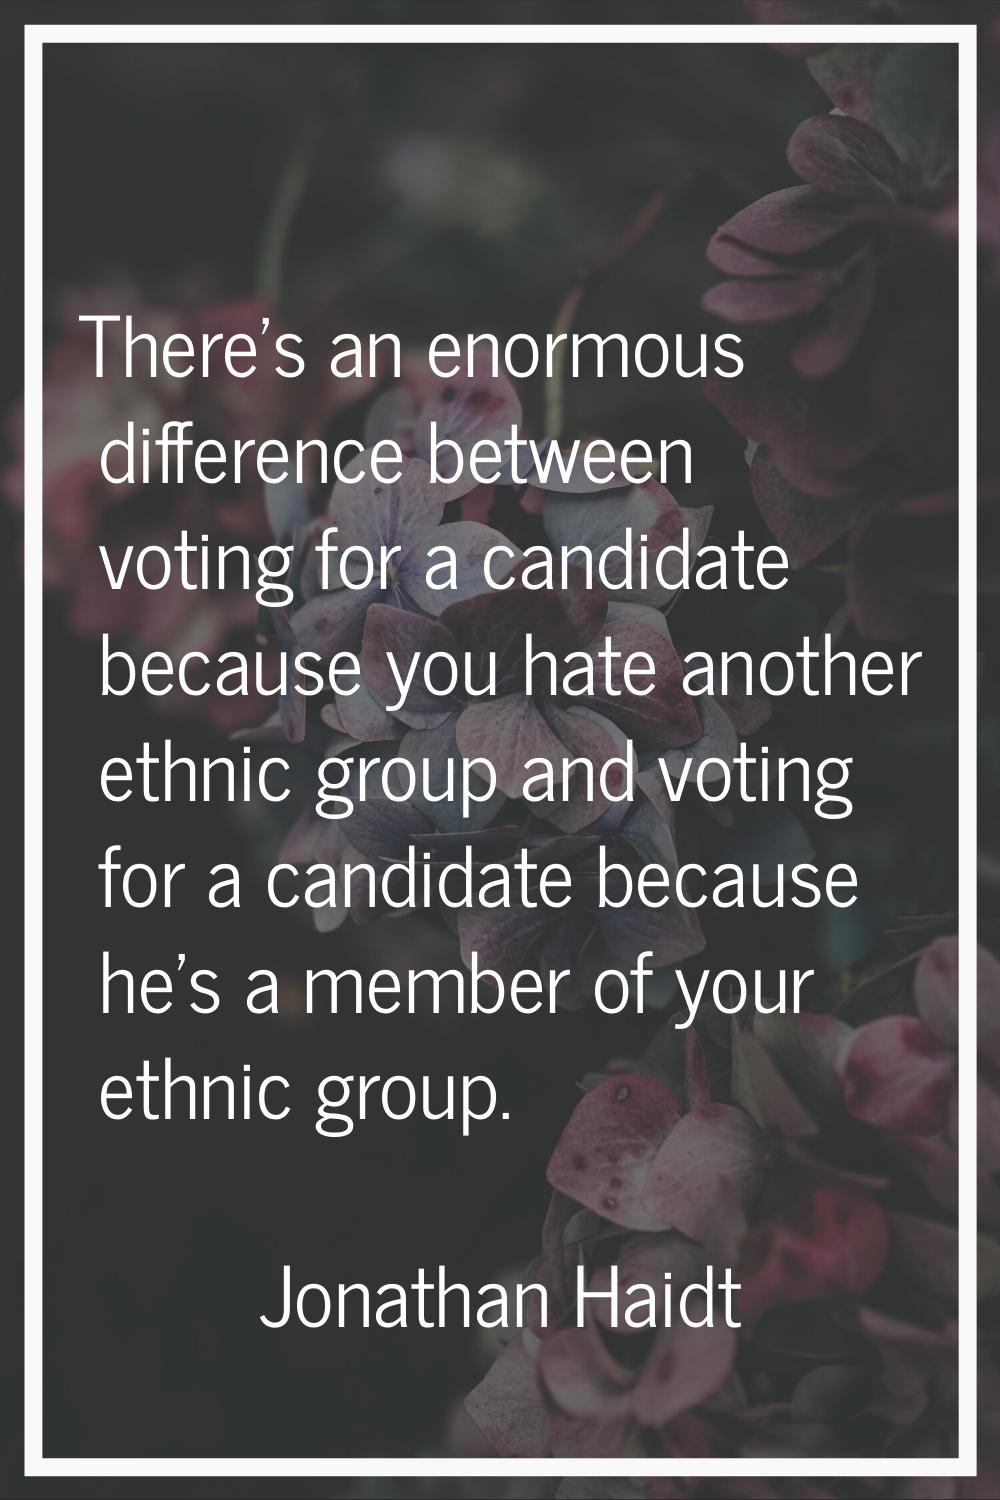 There's an enormous difference between voting for a candidate because you hate another ethnic group